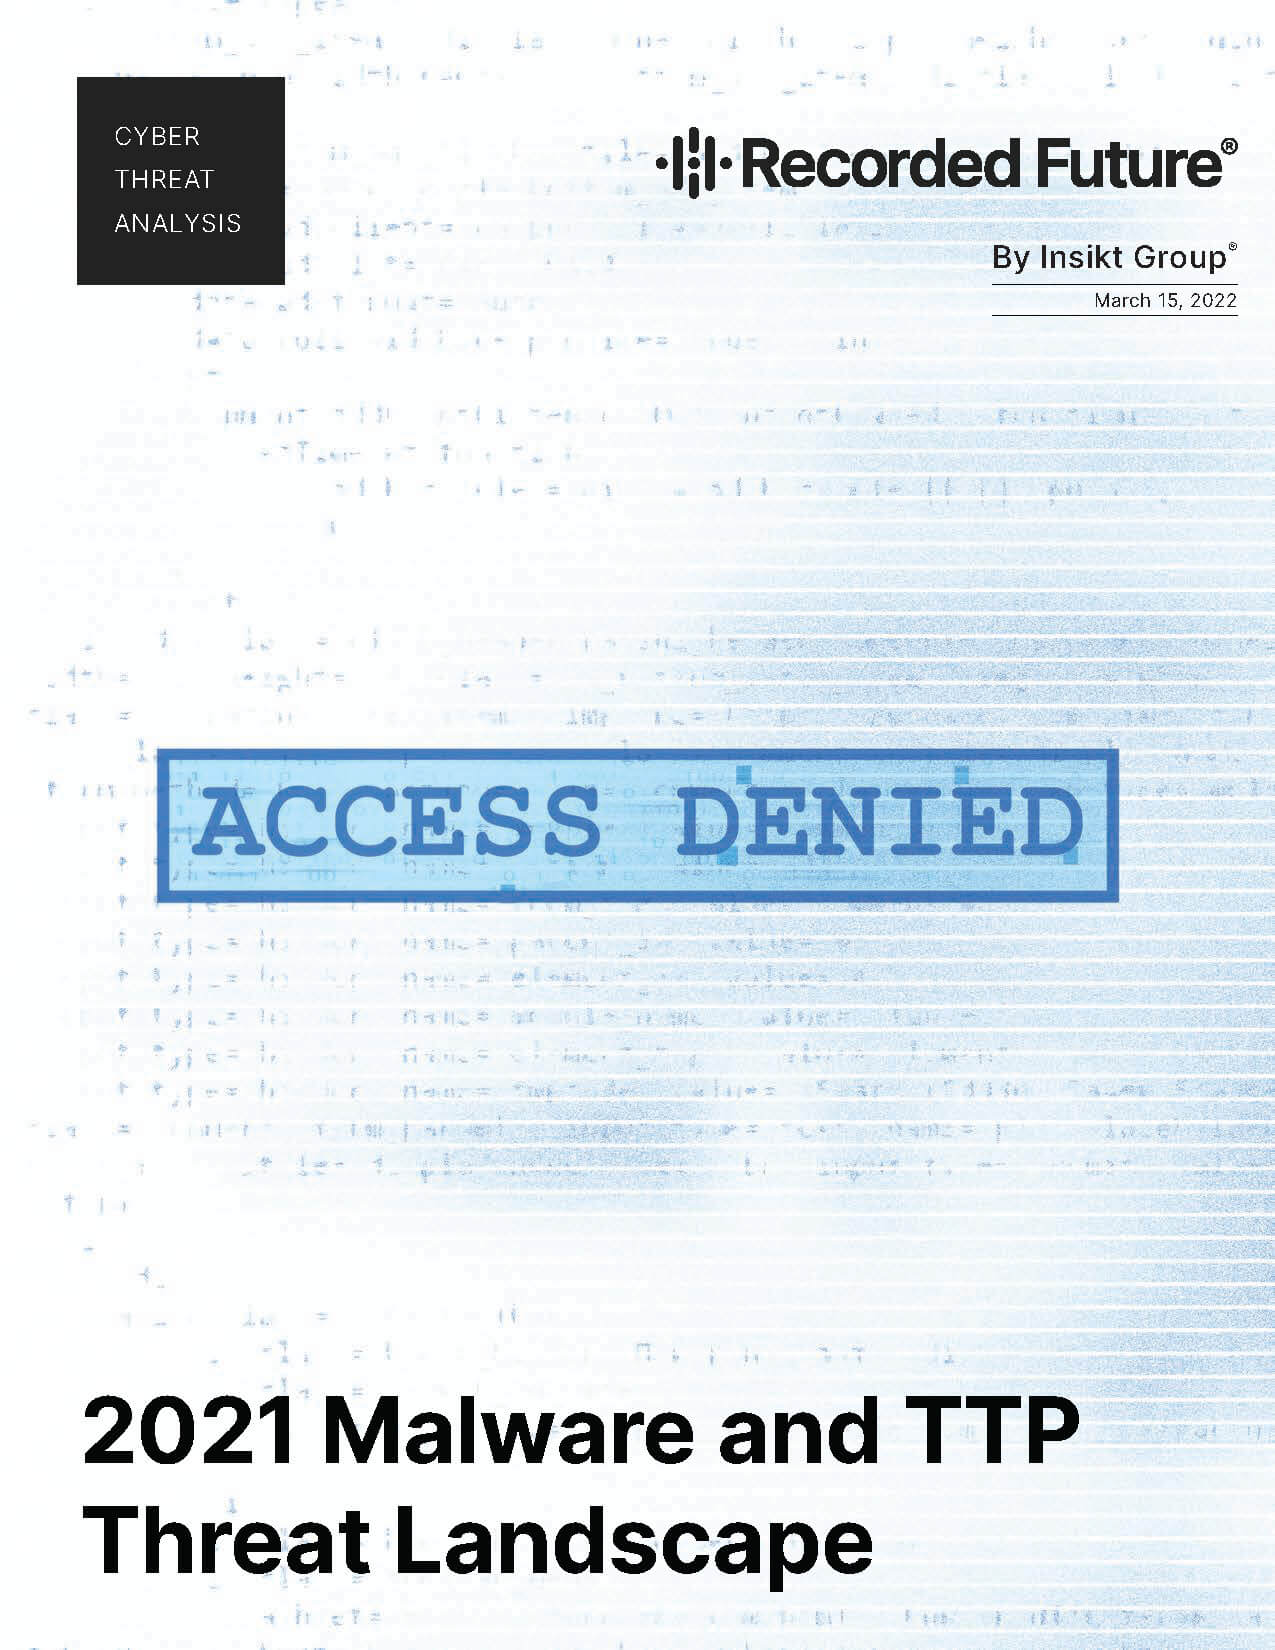 2021 Malware and TTP Threat Landscape